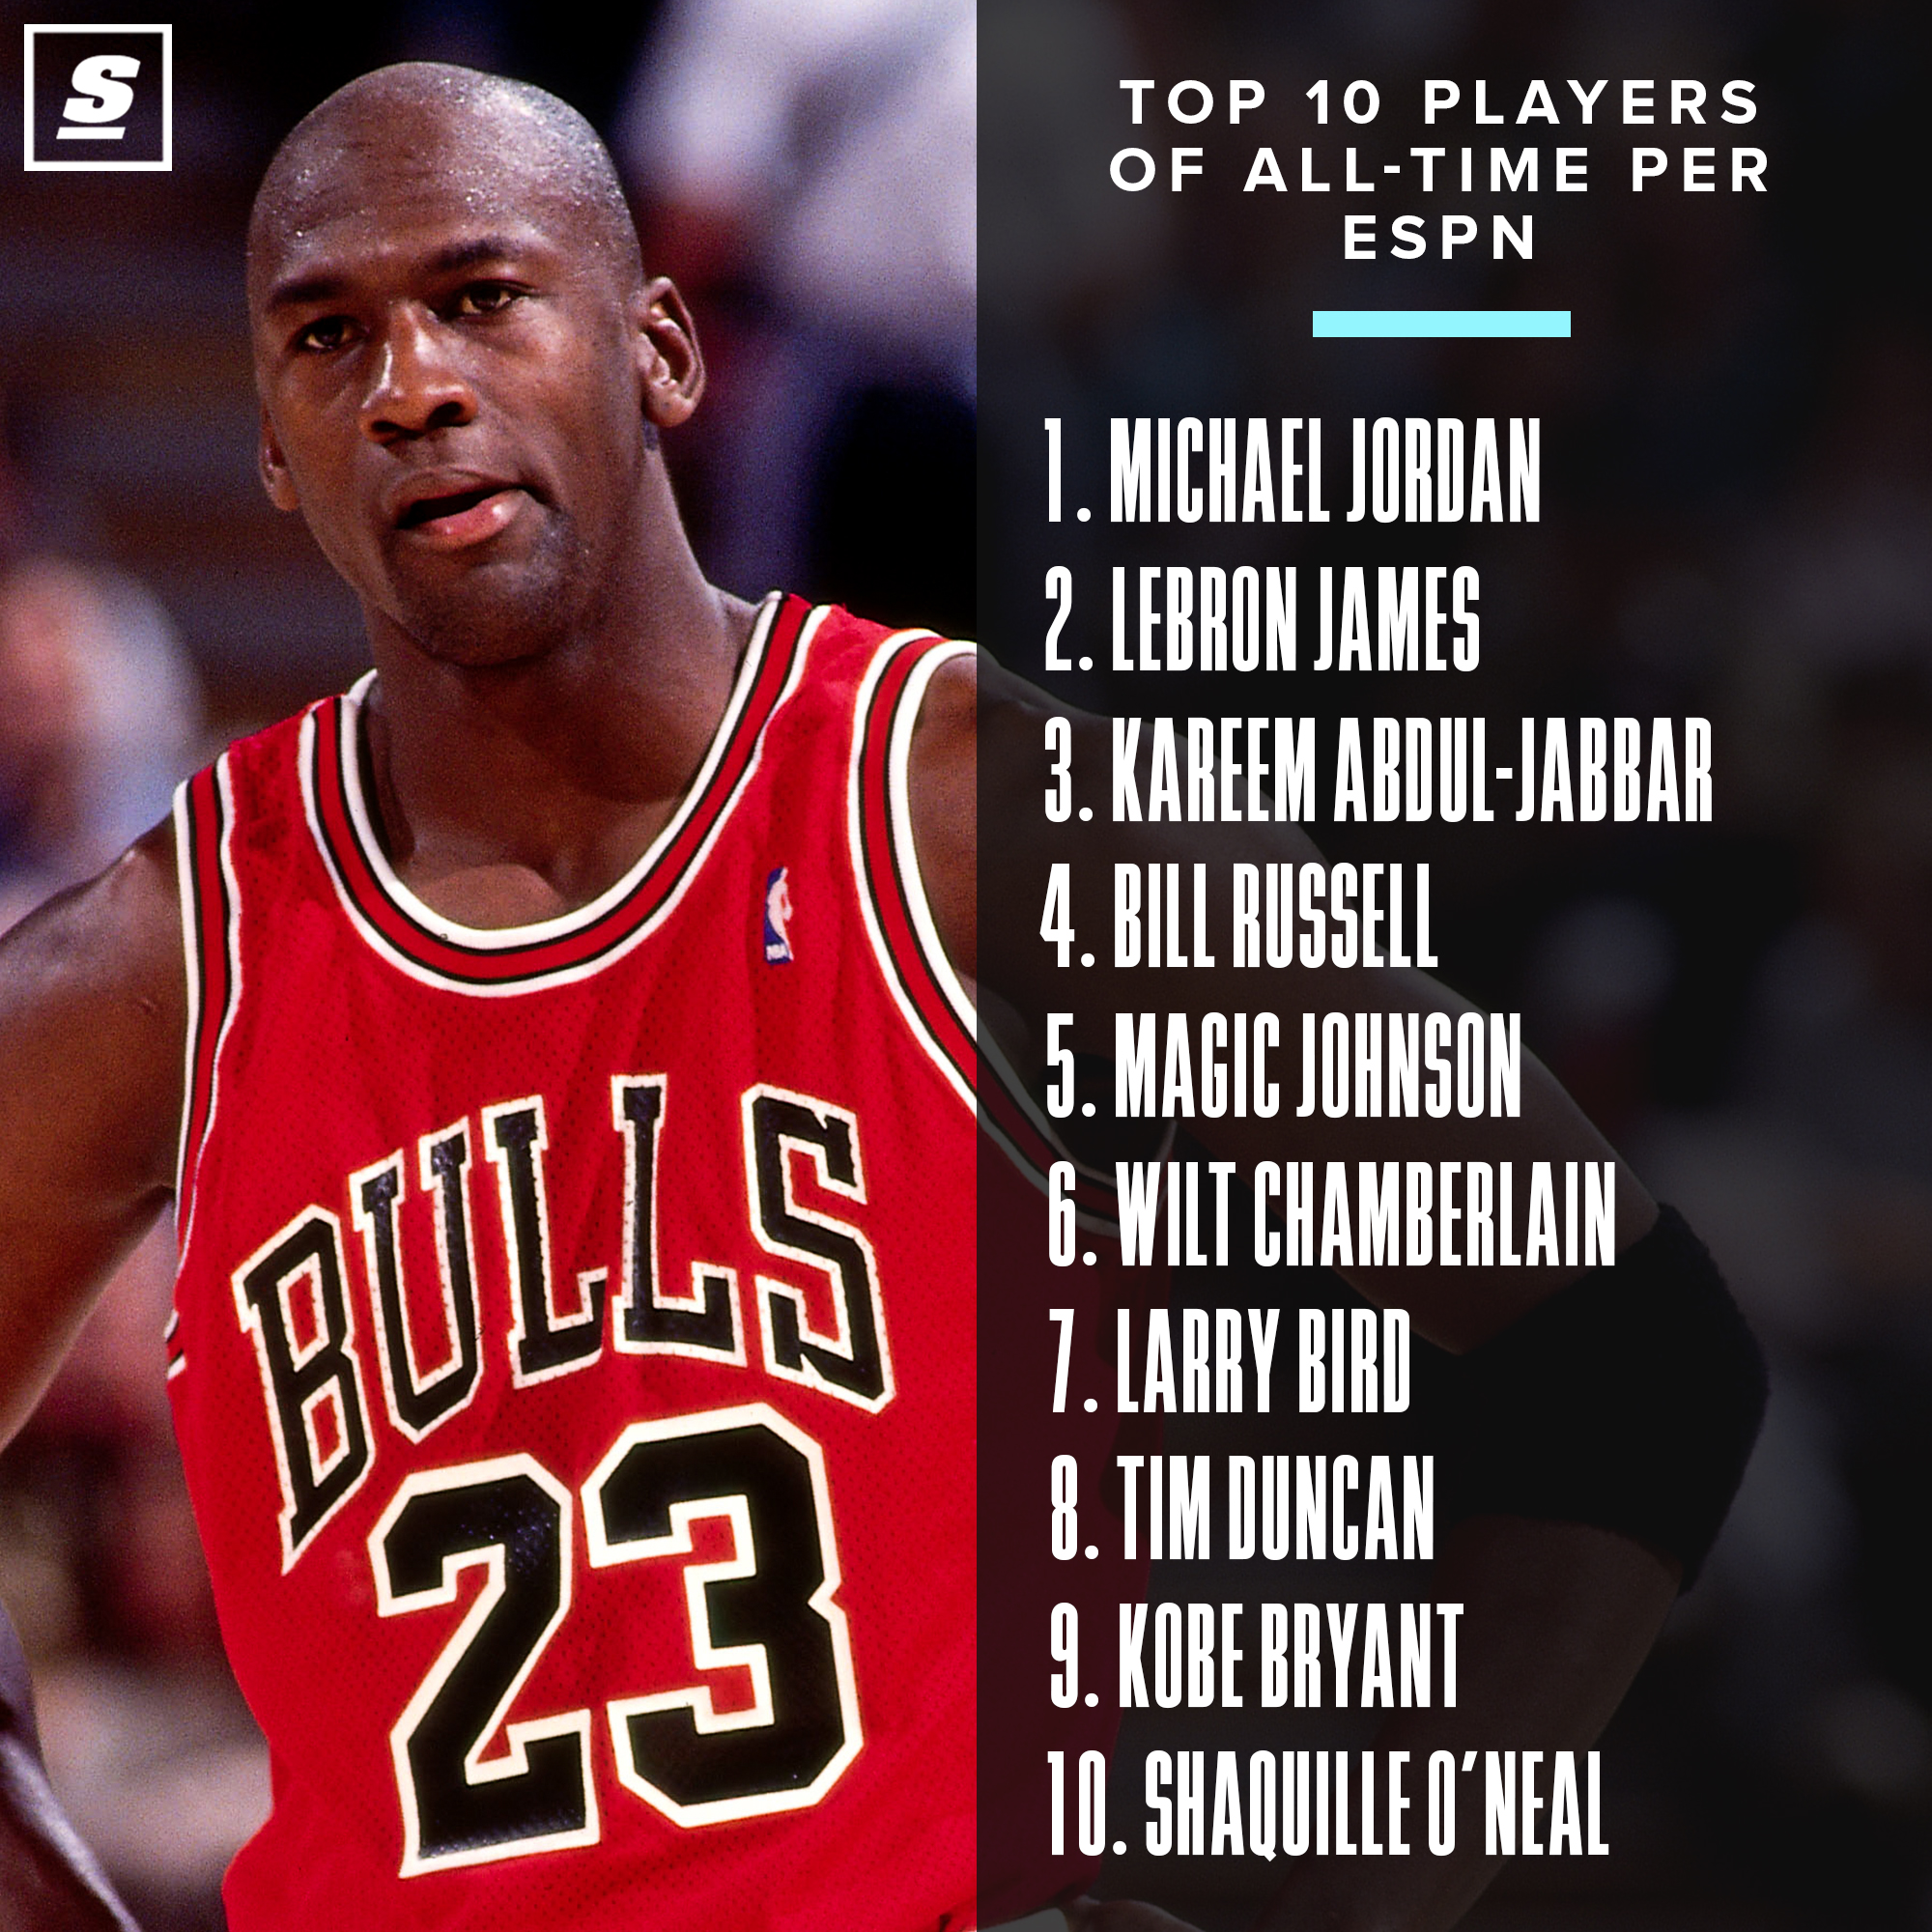 Top players. НБА ведущие США ESPN. Best assister of all time NBA. Top 10 Players. Top 10 Jazz Players of all time.